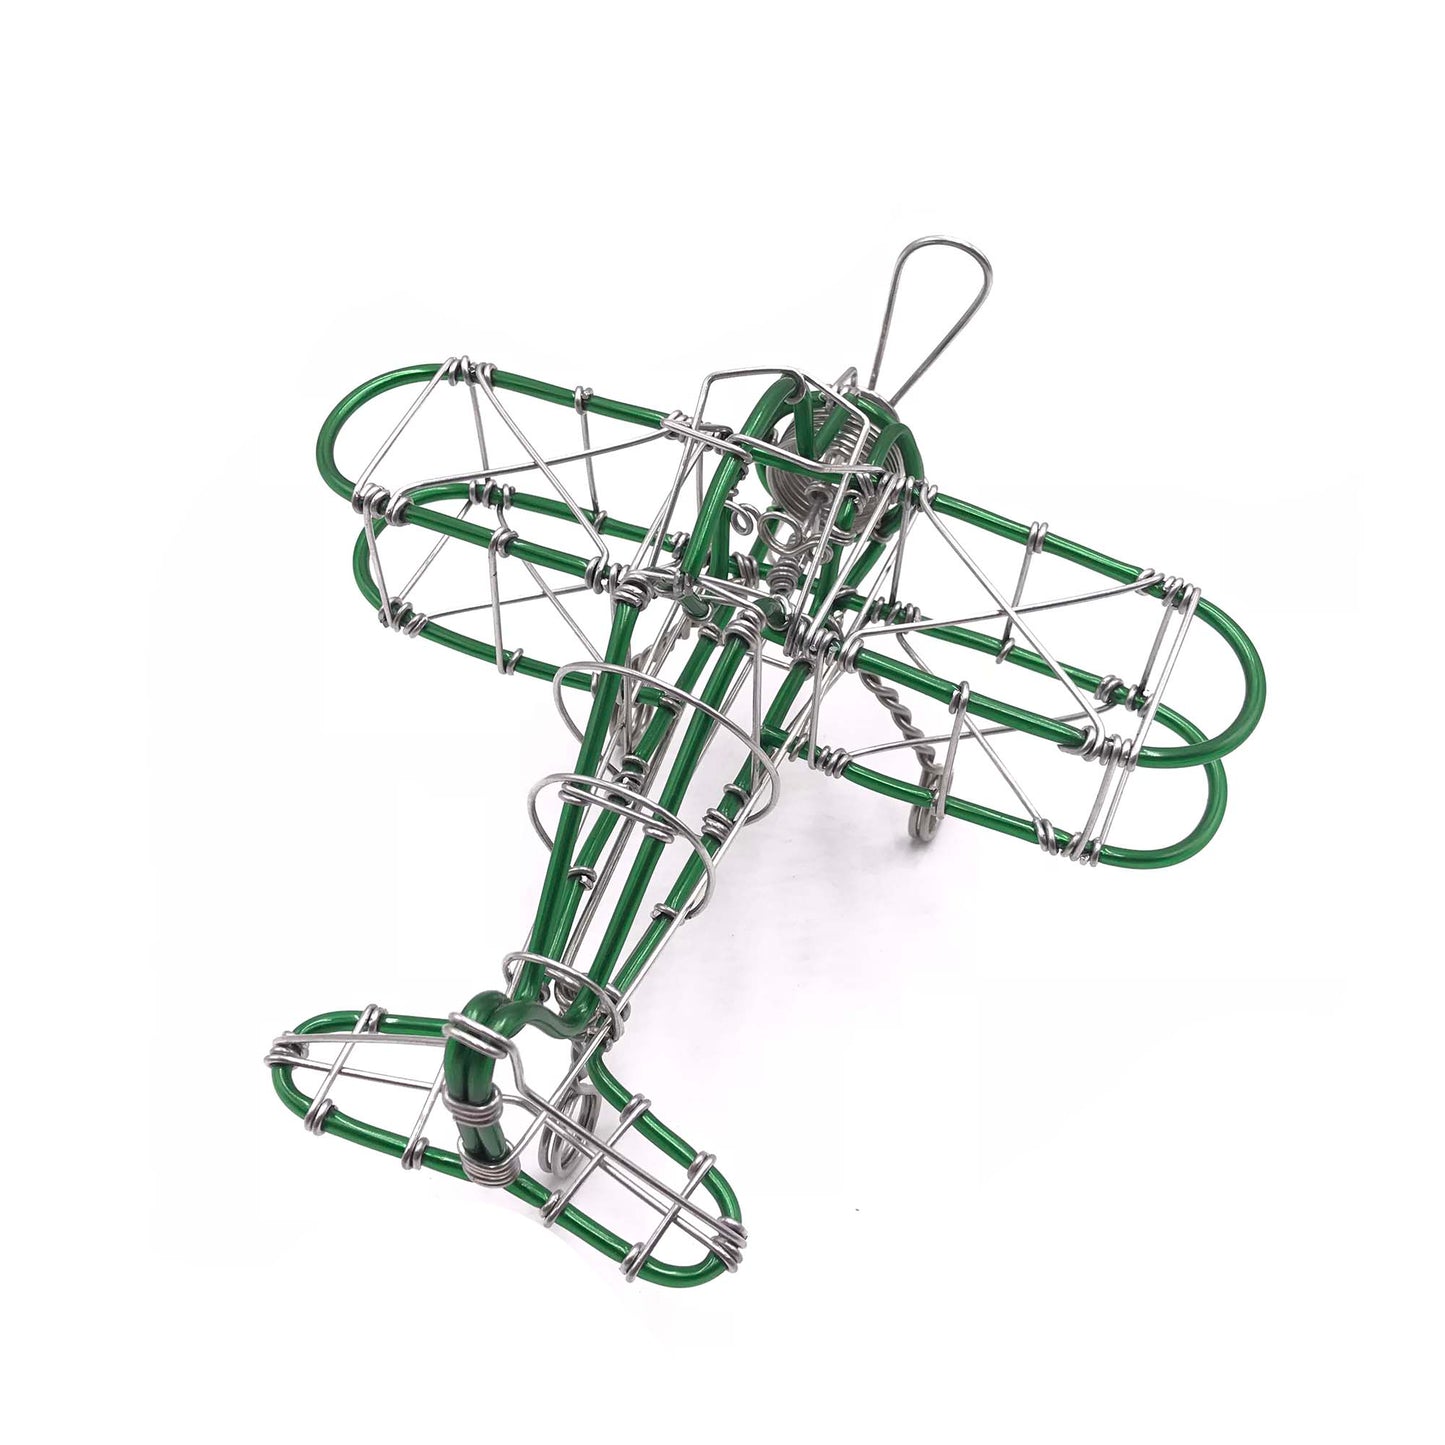 Miniature Wire Art Airplane hand-crafted from aluminium wire